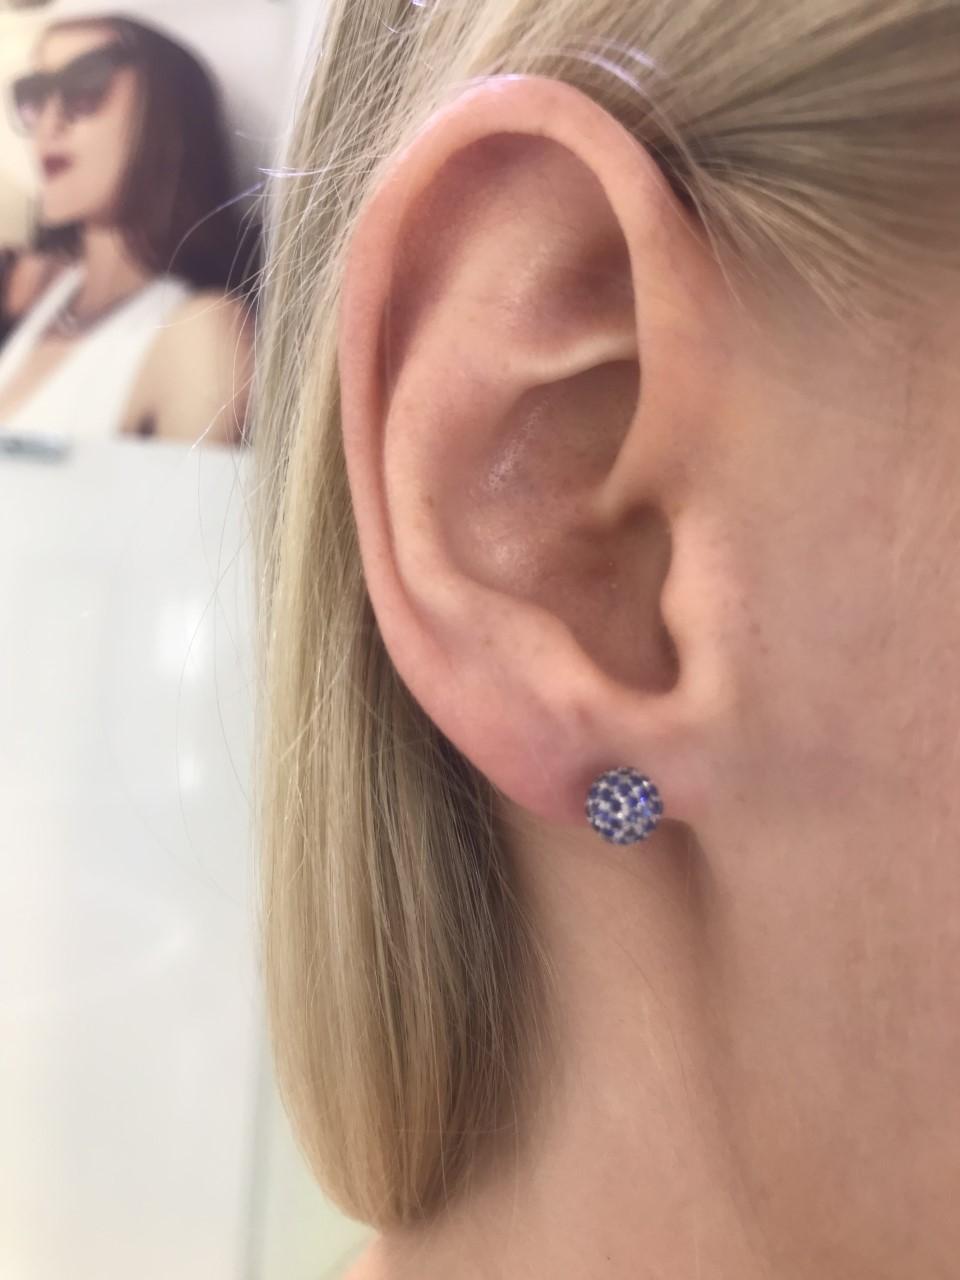 These illuminating Pave Set Sapphire earrings are decorated with striking Blue 1.00 Carat Sapphires set in luxurious 18 Karat White Gold. These iconic ball studs are perfect for any occasion. Size 6mm, available in other carat sizes and colors upon